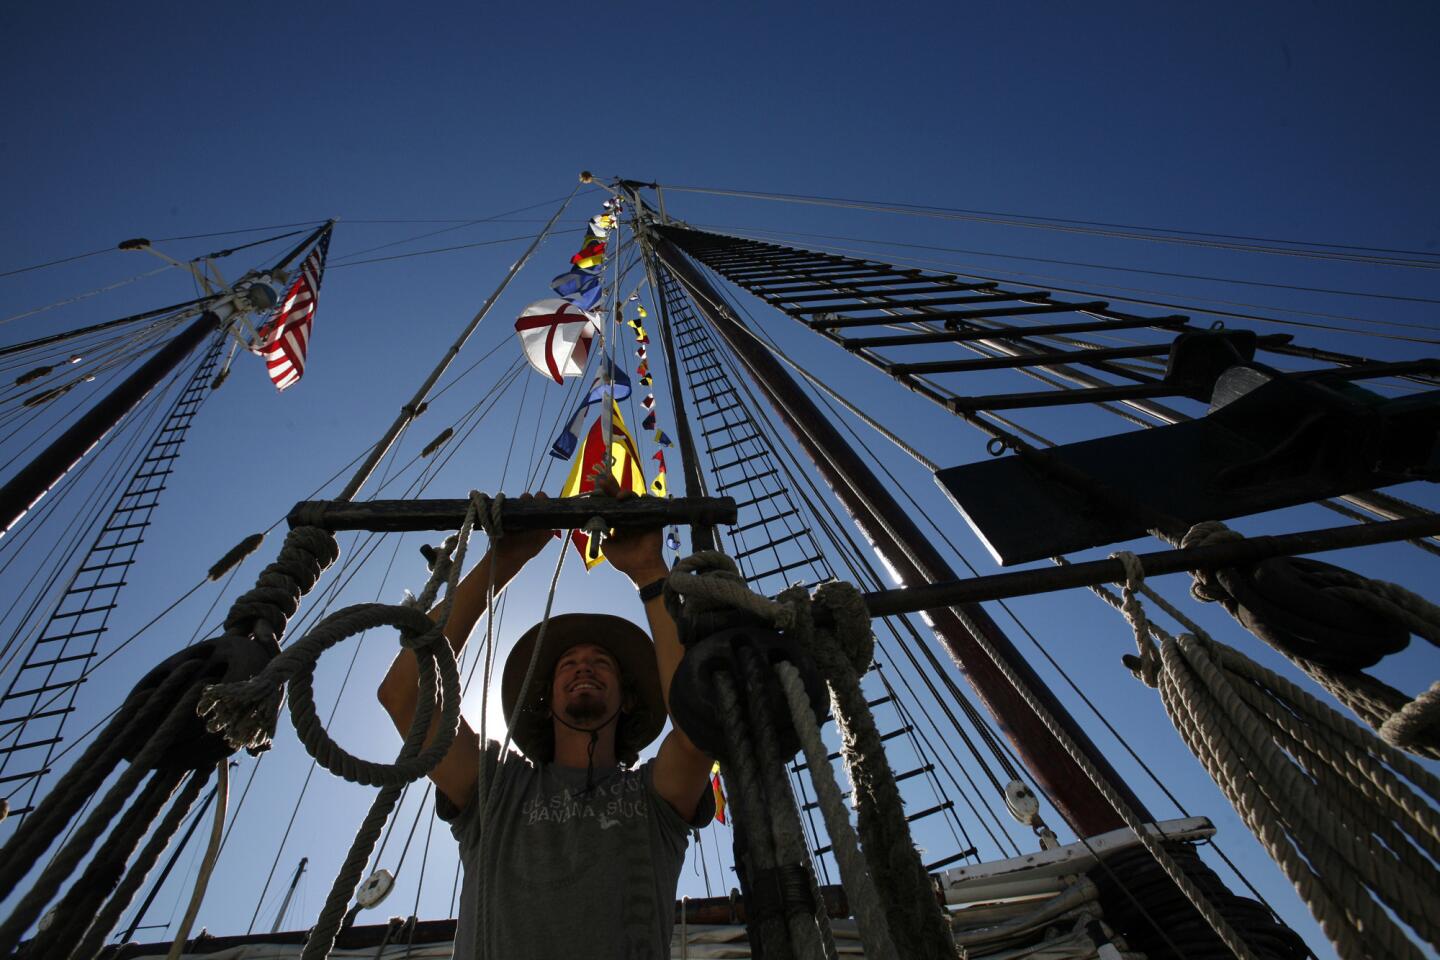 Zac Butko runs flags up the masts on the Bill of Rights tall ship before taking out a group of students from Channel Islands High School.